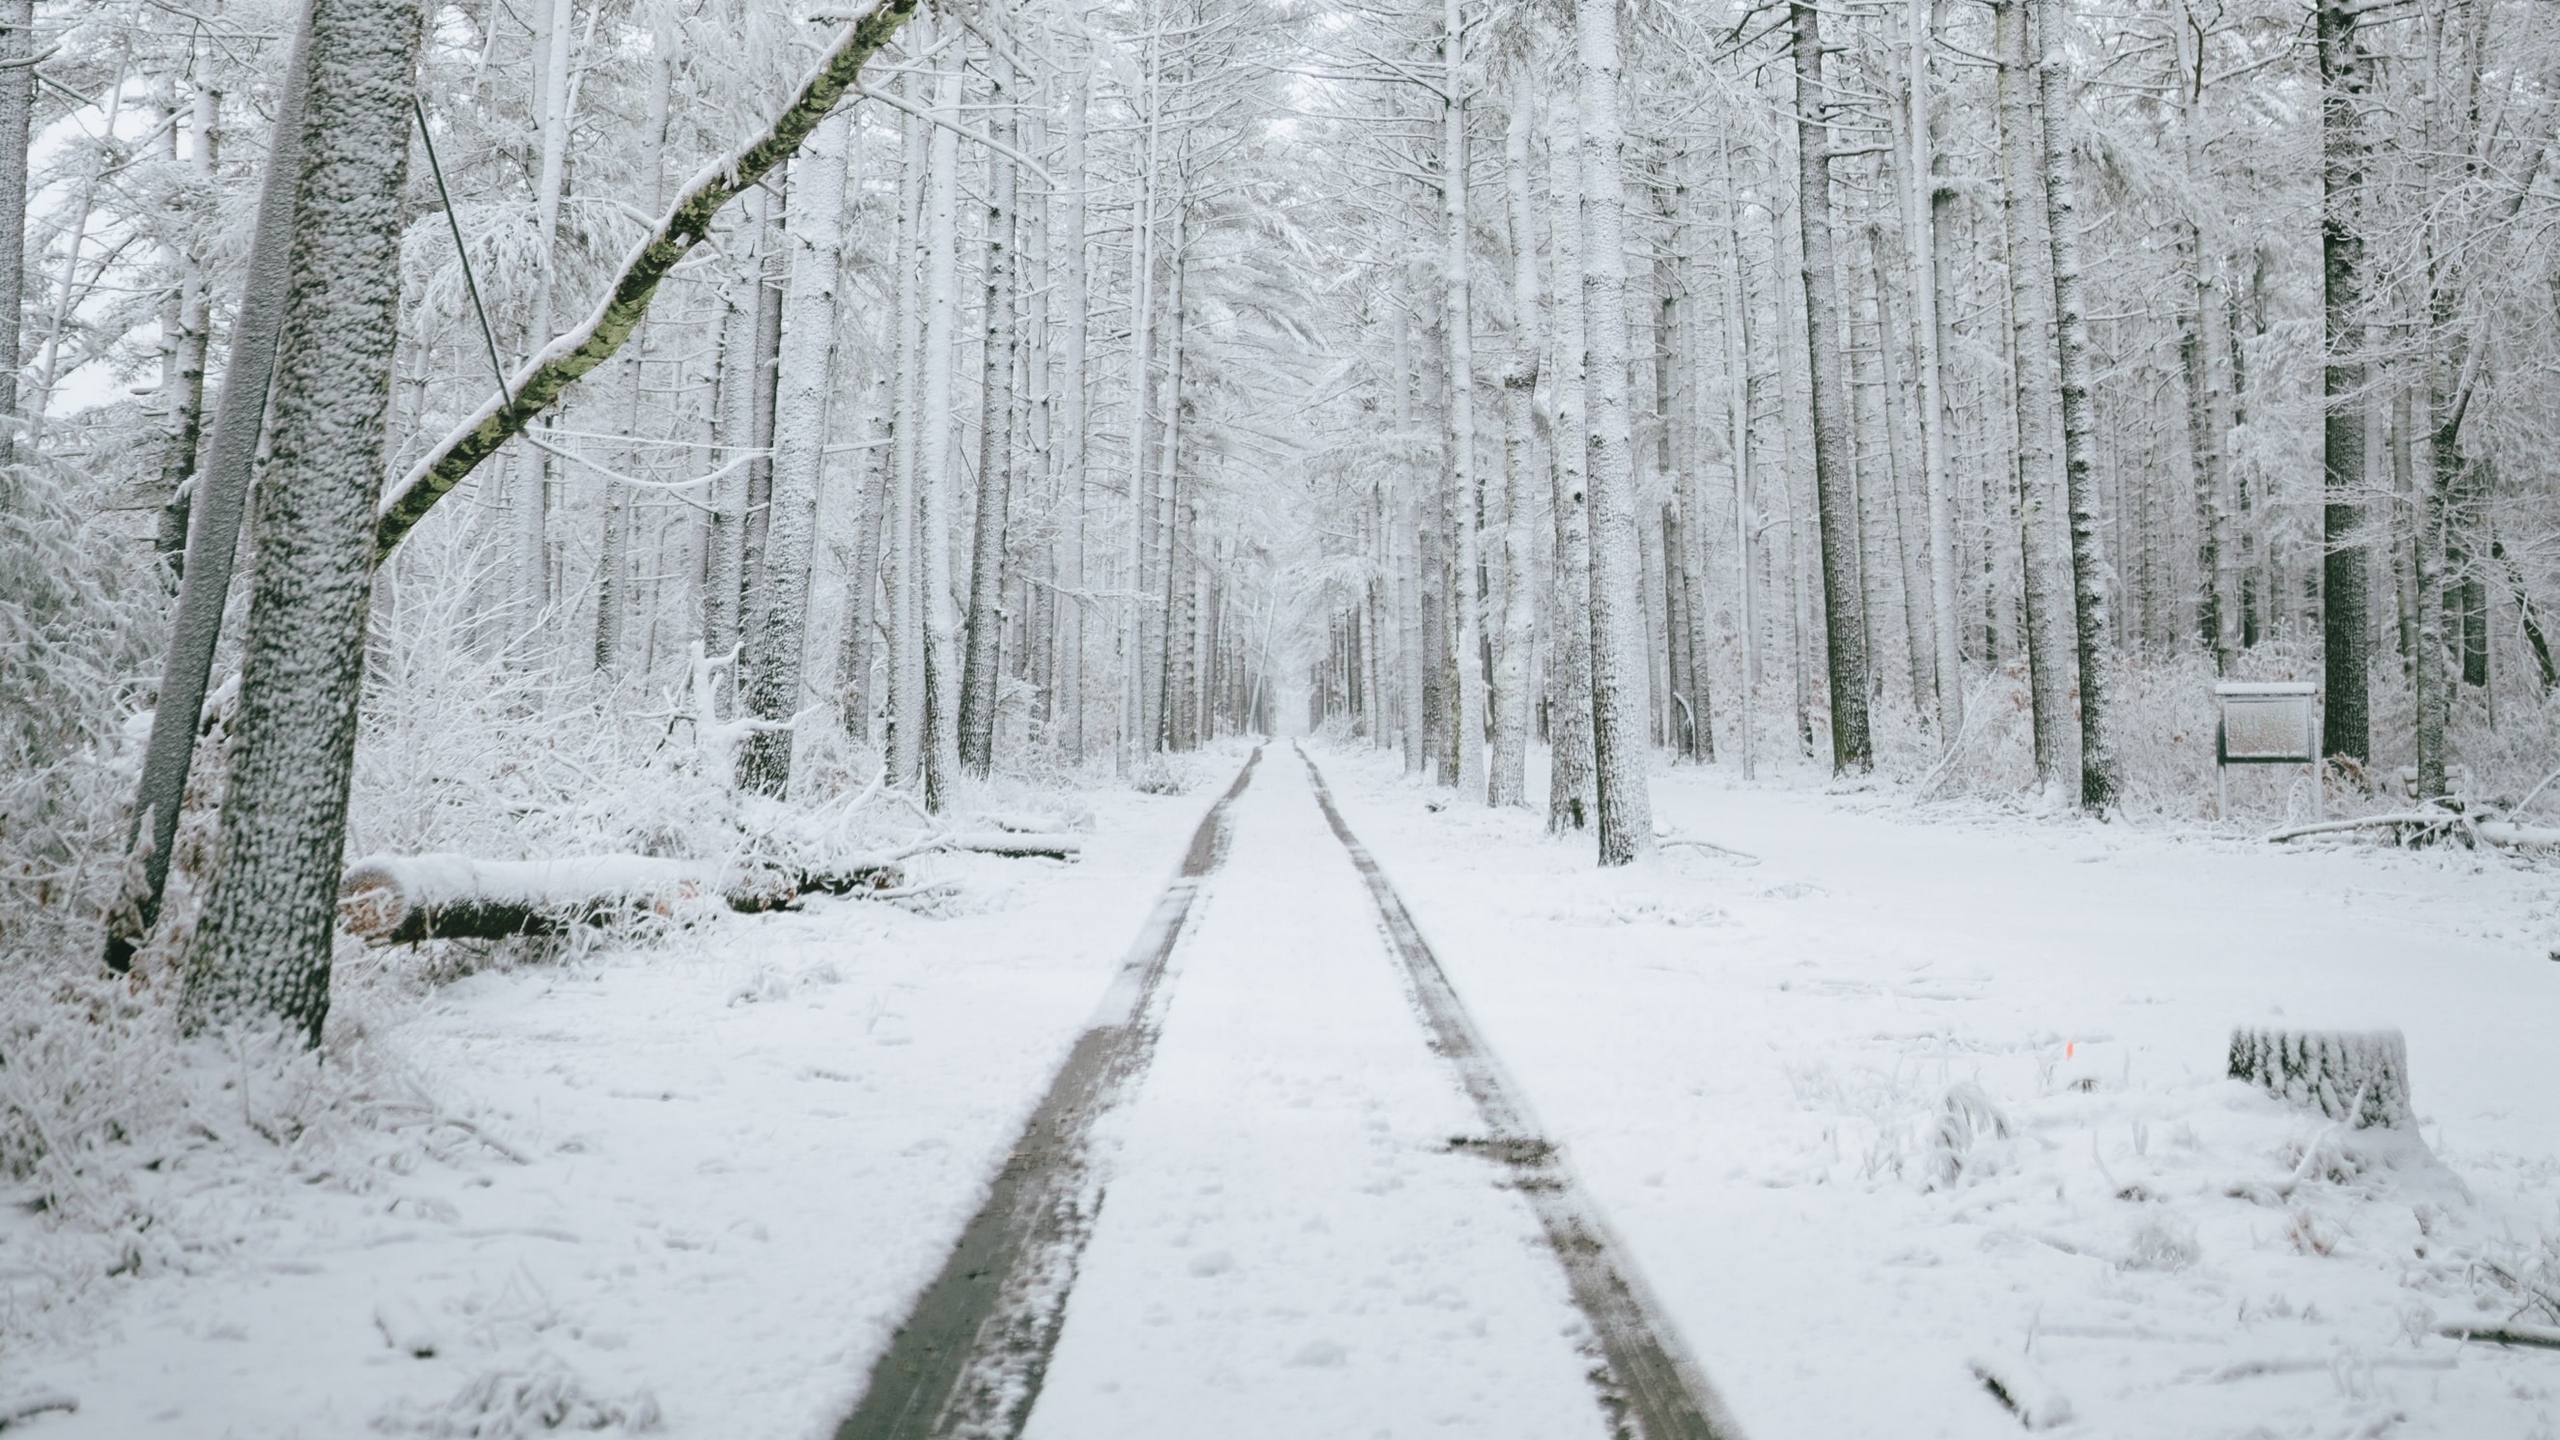 Download wallpaper 2560x1440 forest, path, snow, trees, winter